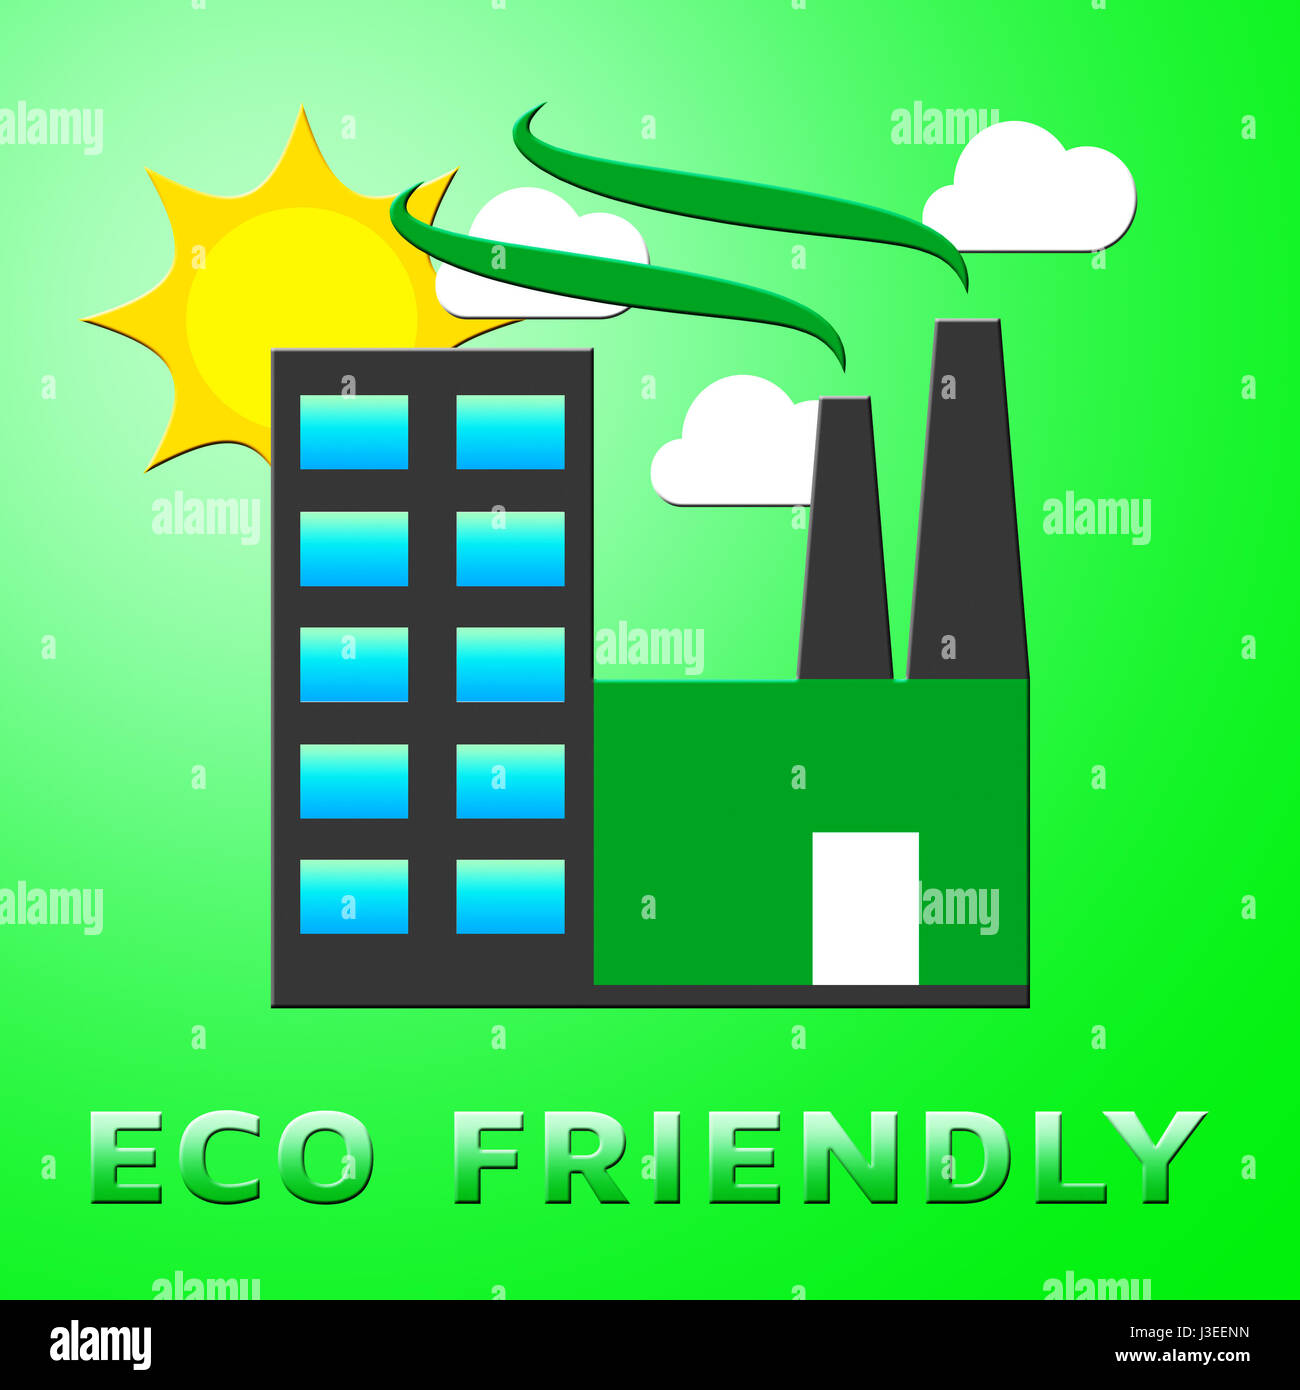 Eco Friendly Factory Represents Earth Nature 3d Illustration Stock Photo